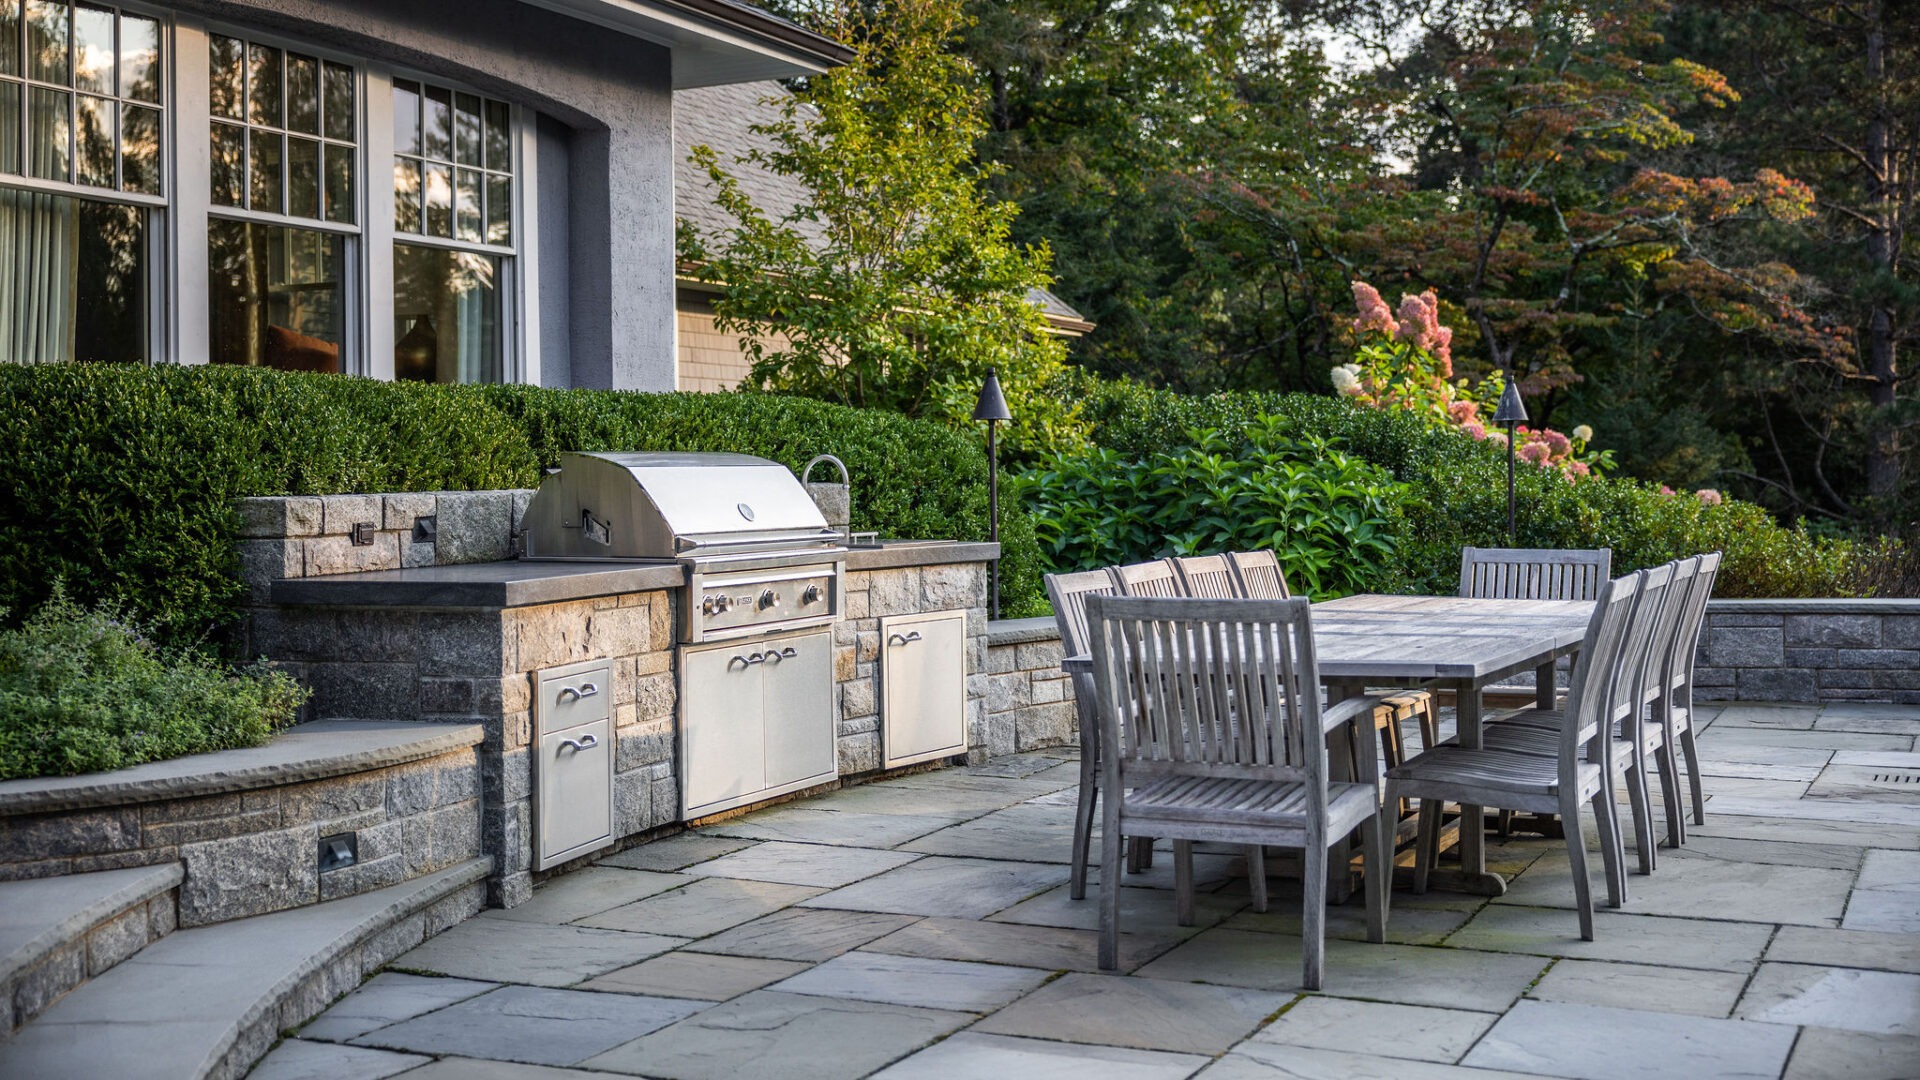 An outdoor patio featuring a stone-built kitchen area with a grill, surrounded by lush greenery, next to a wooden dining set for entertainment.